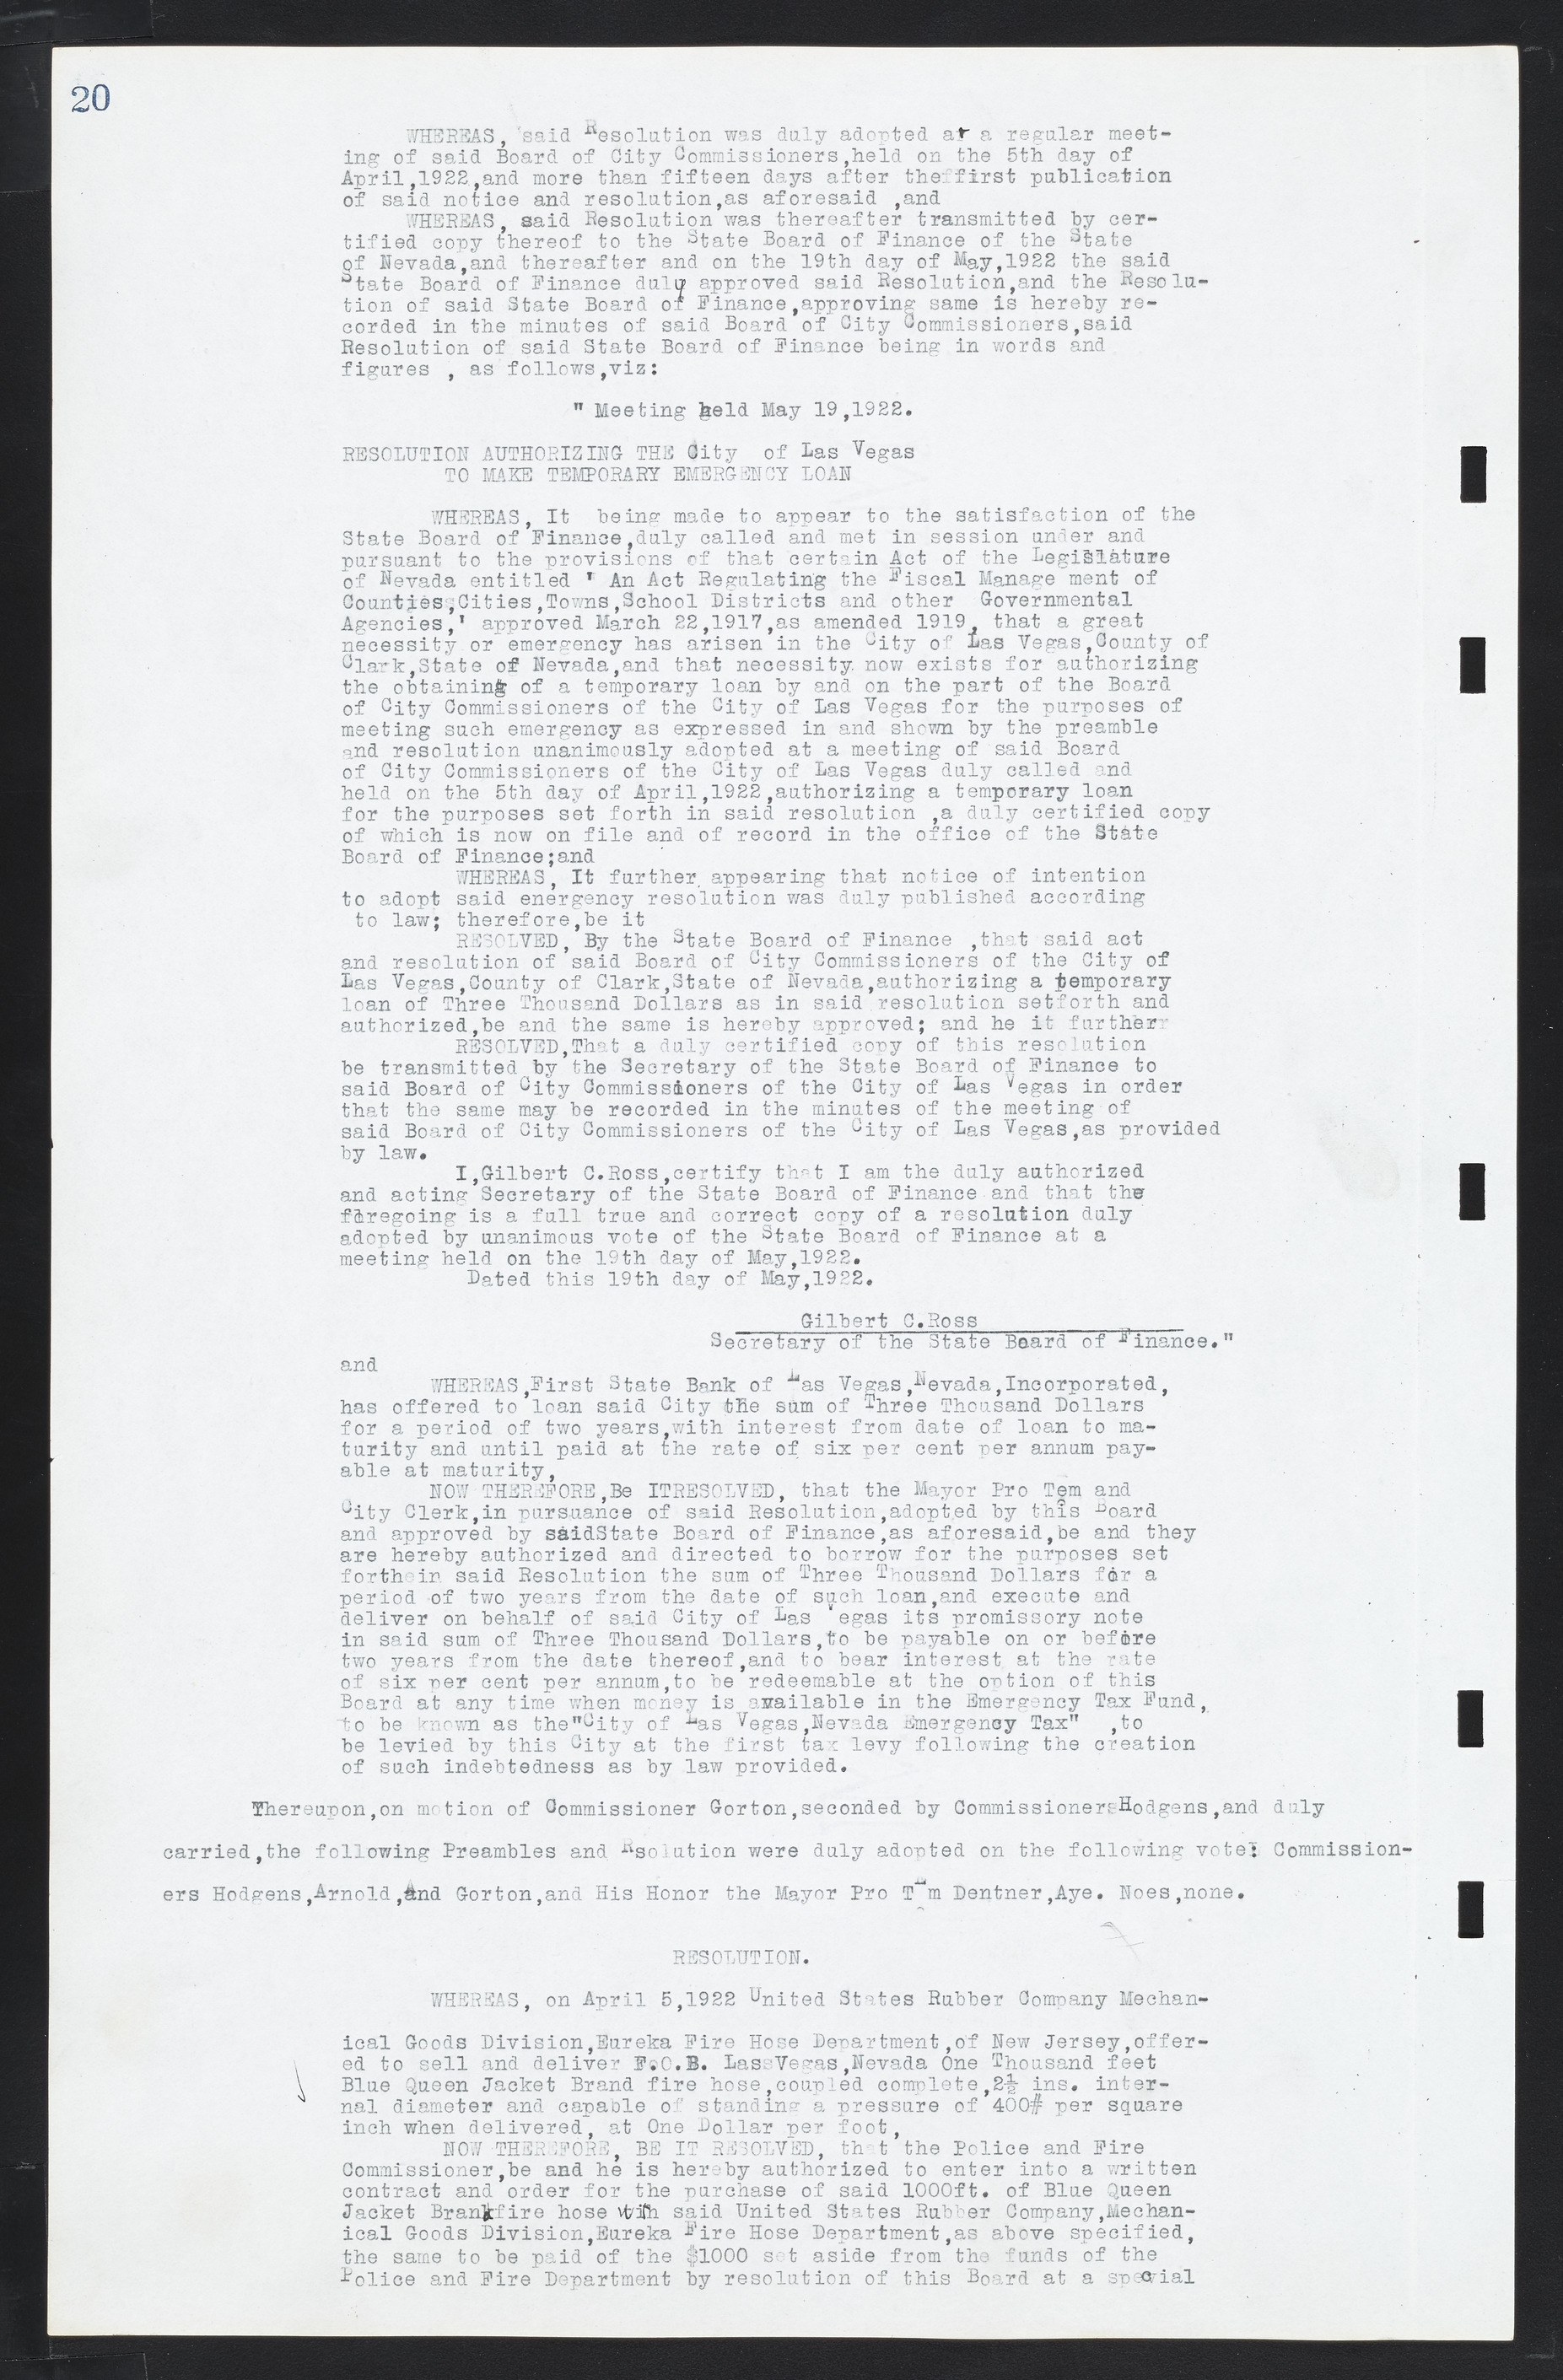 Las Vegas City Commission Minutes, March 1, 1922 to May 10, 1929, lvc000002-27